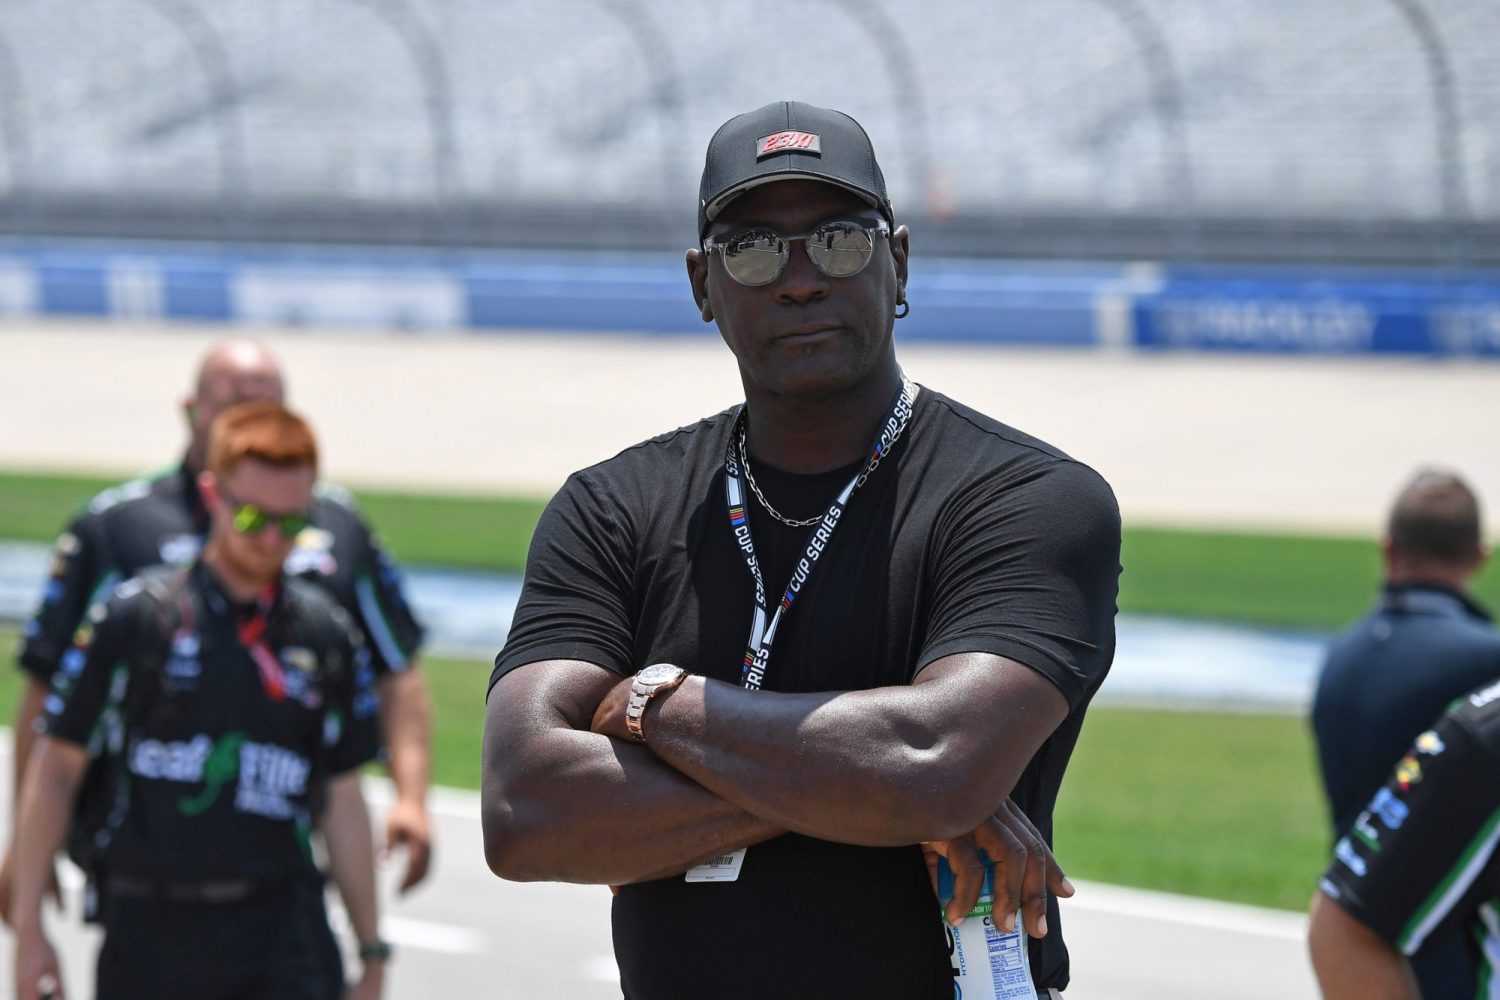 Team 23XI owner Michael Jordan looks on from pit road during qualifying before the Ally 400 at Nashville.